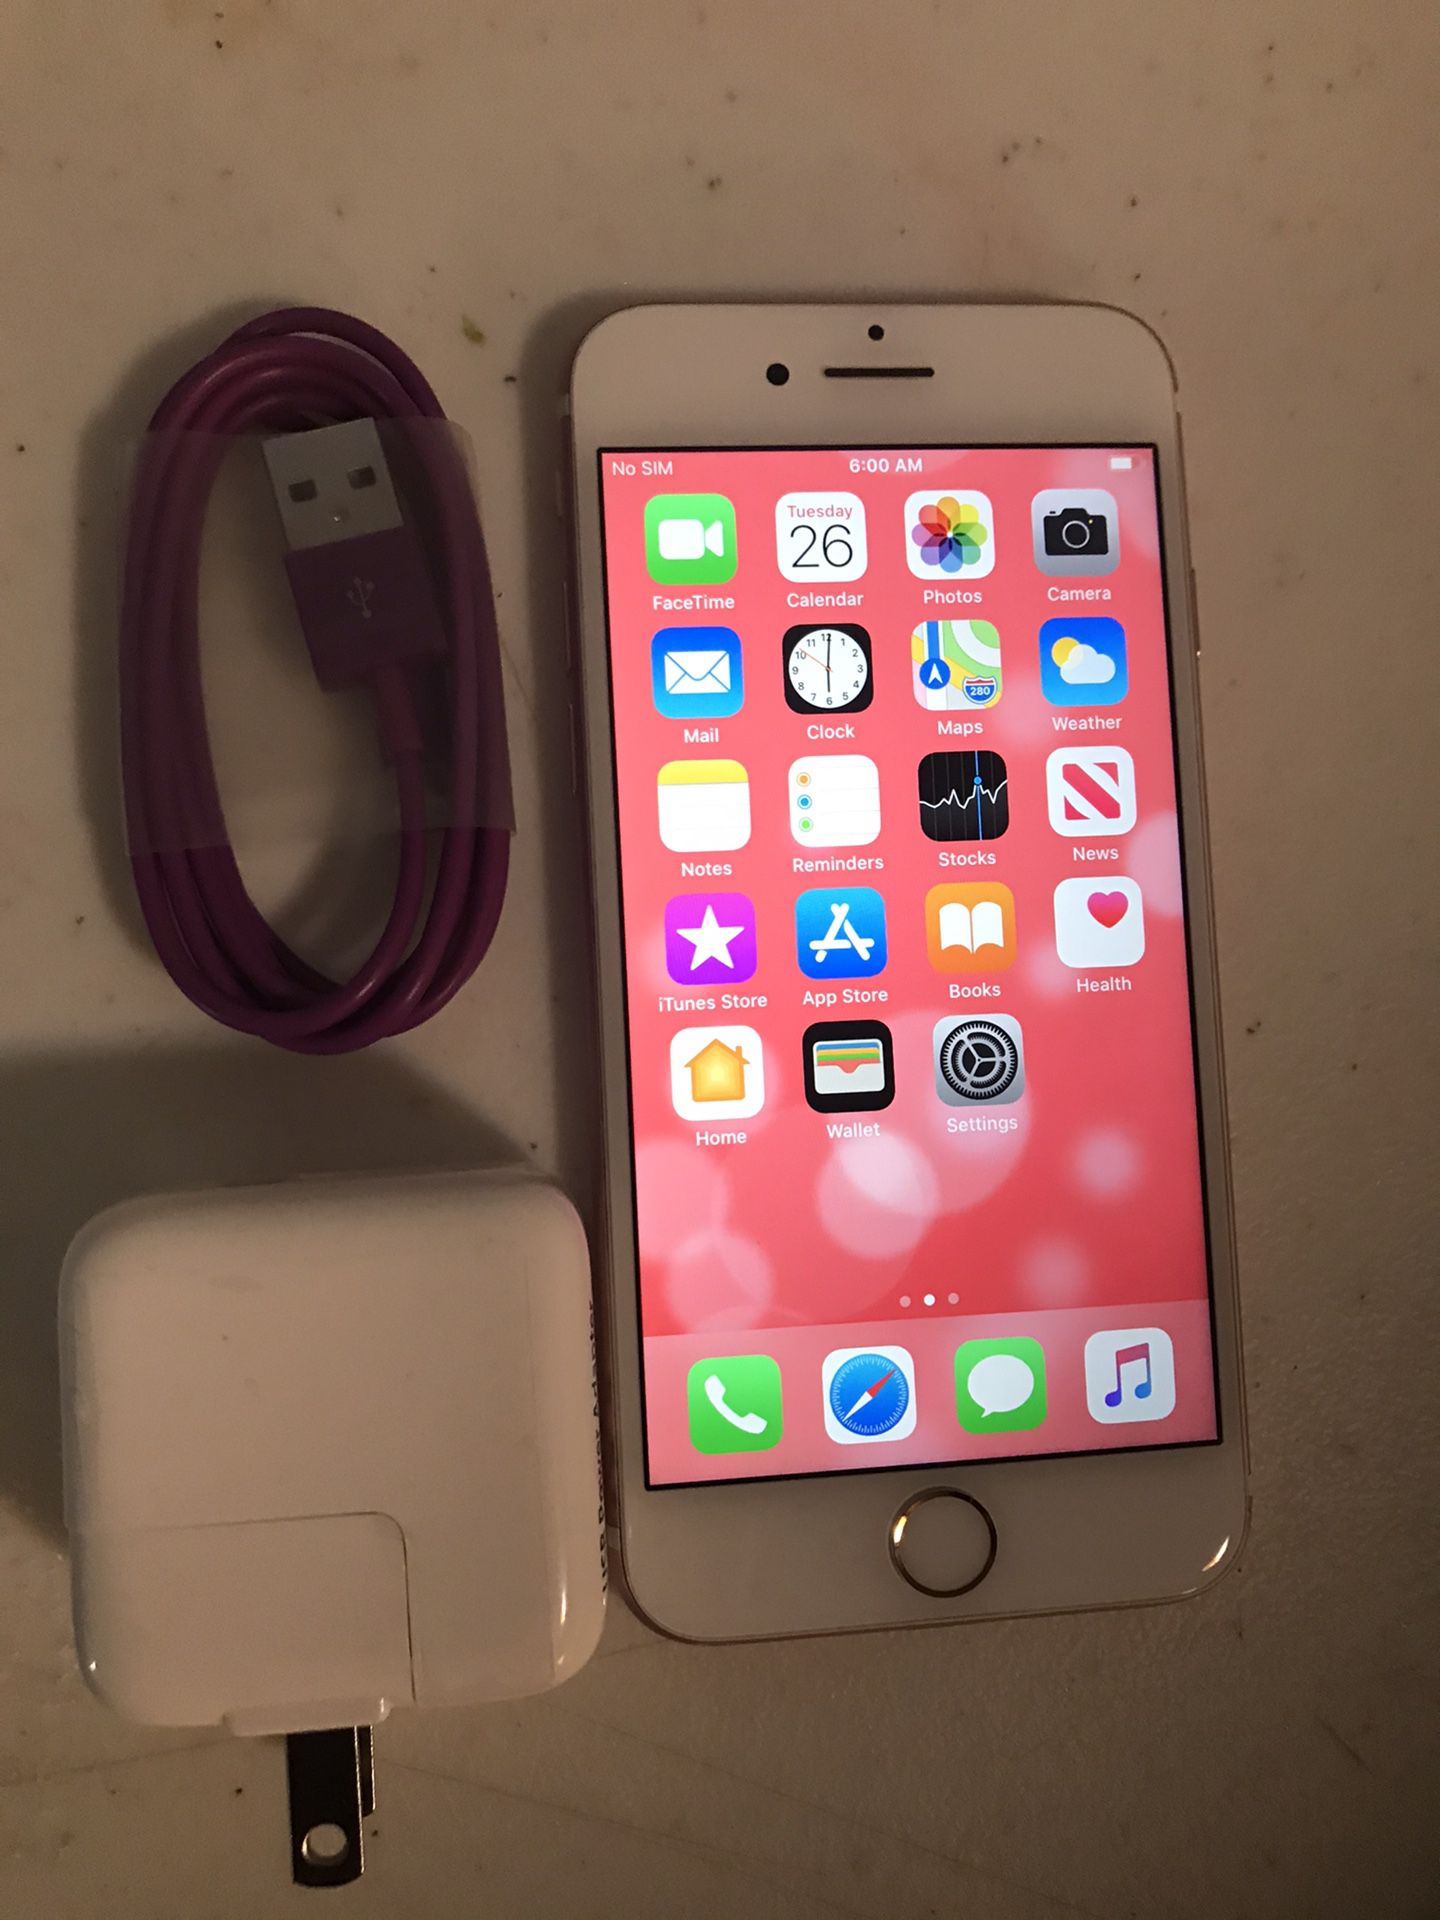 Apple iPhone 7 128 GB unlocked.color gold ROSE.work very well. Included charger.perfect condition.